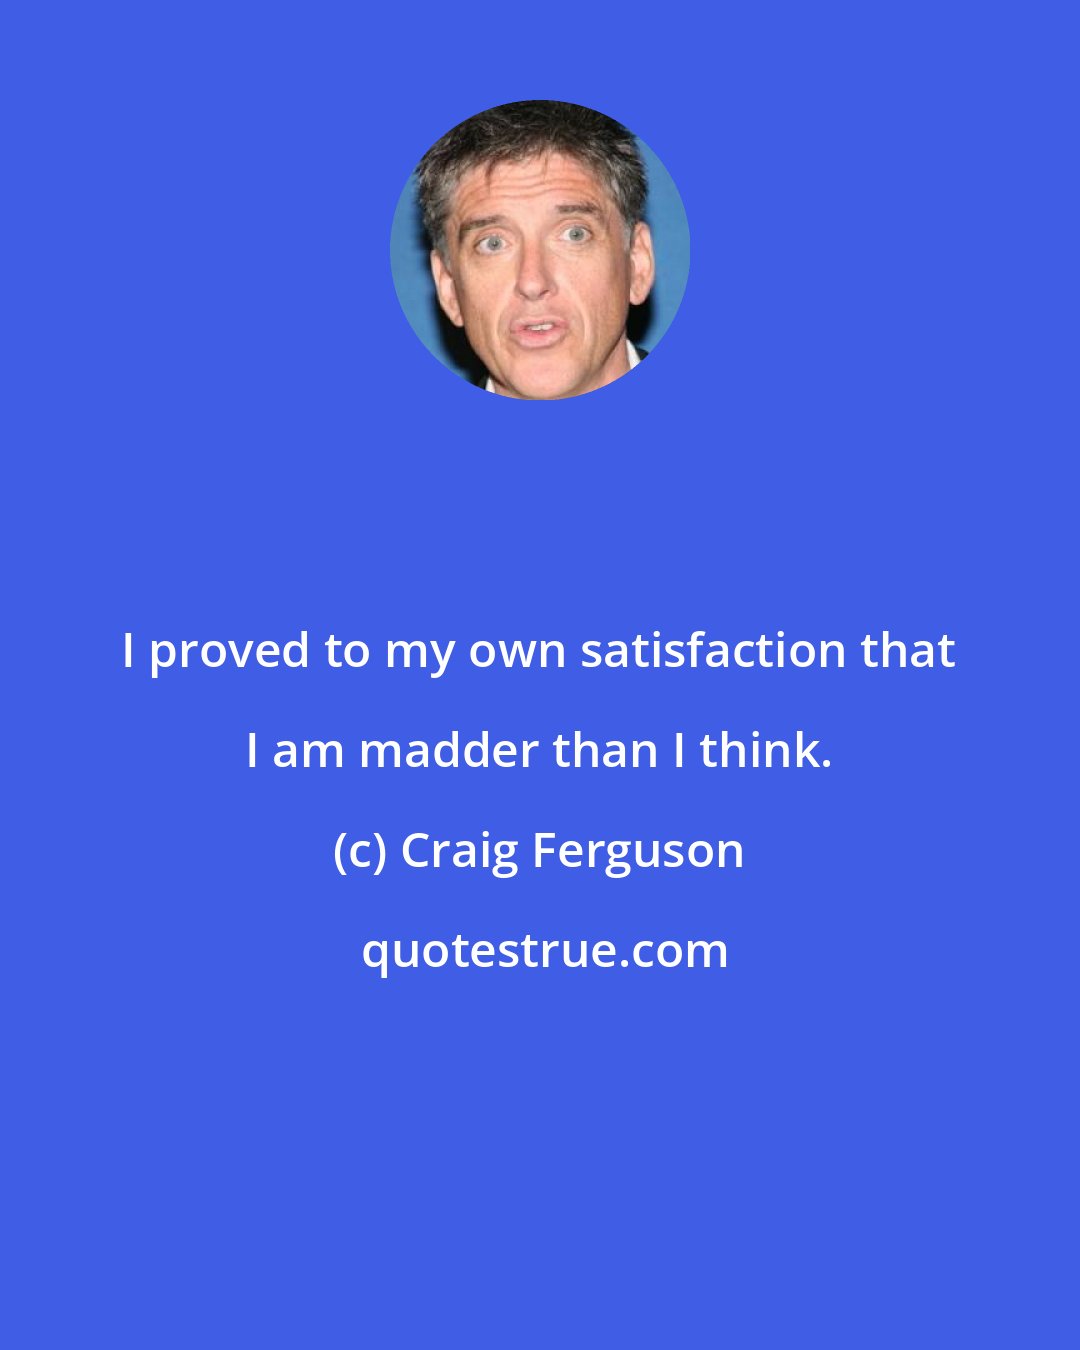 Craig Ferguson: I proved to my own satisfaction that I am madder than I think.